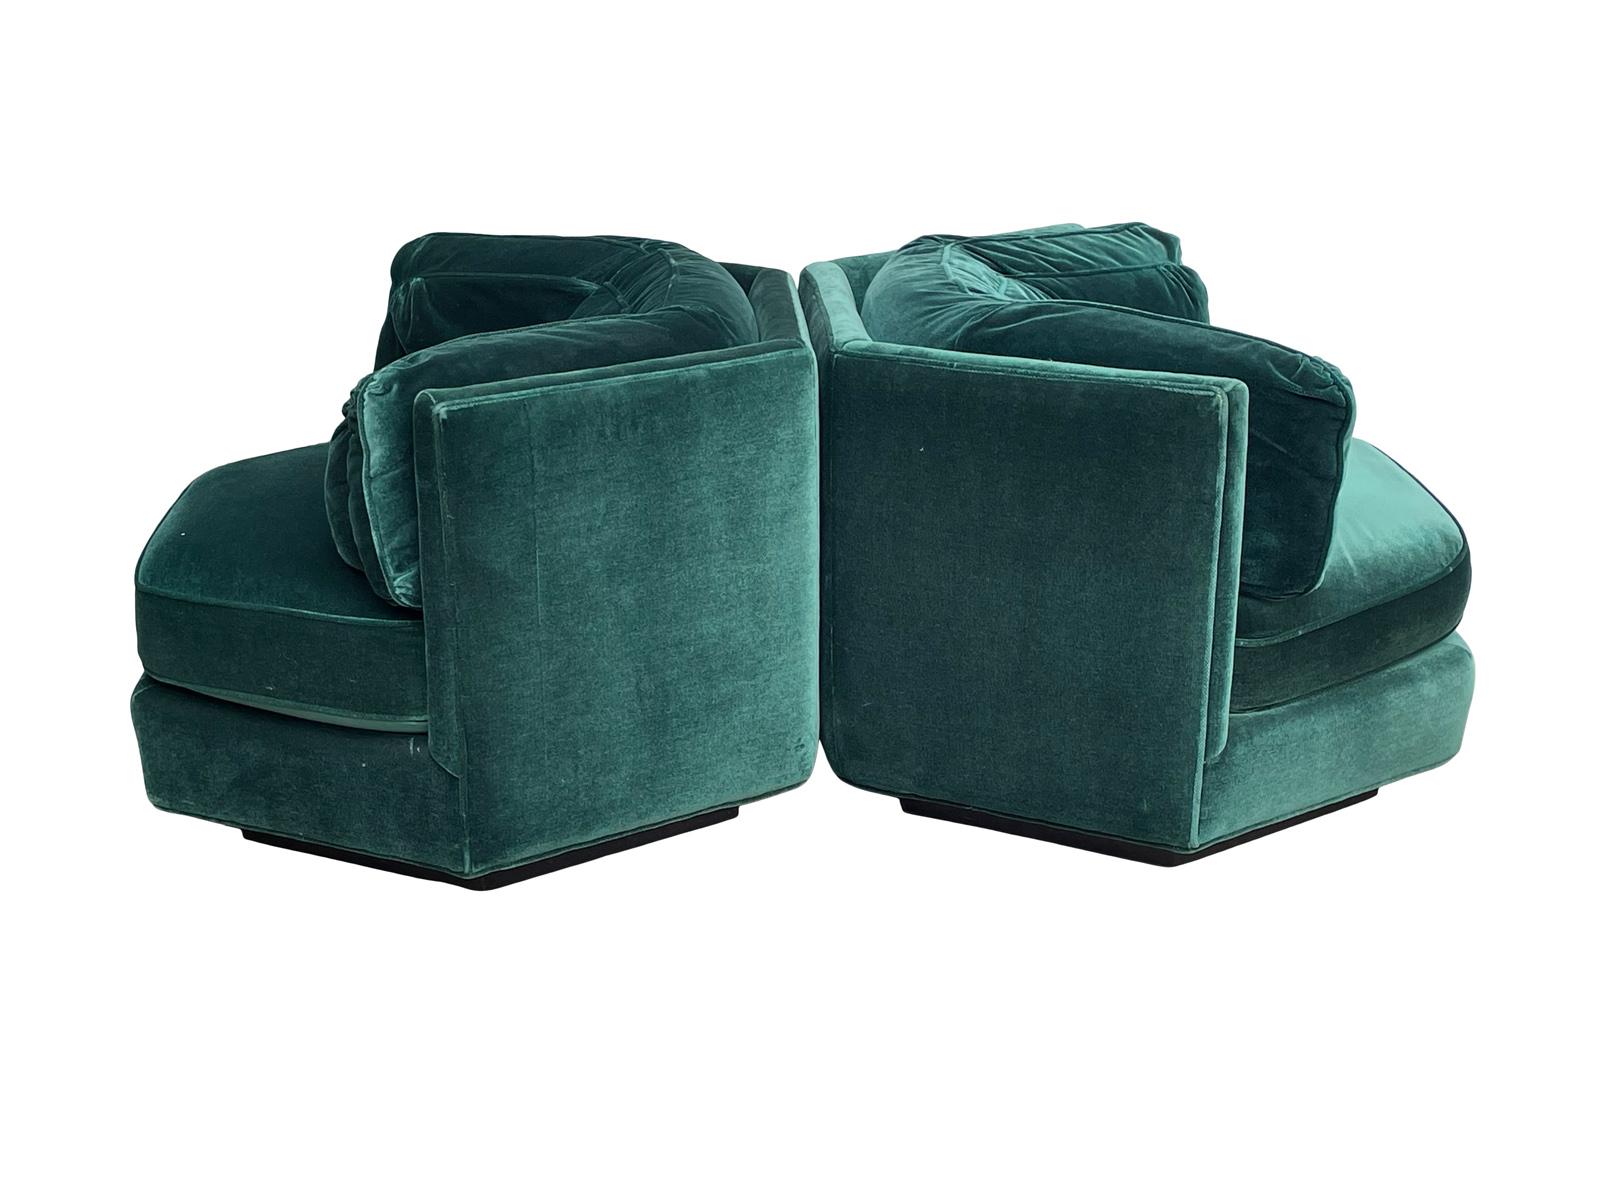 Stunning pair 1970s hexagonal lounge chairs designed by 